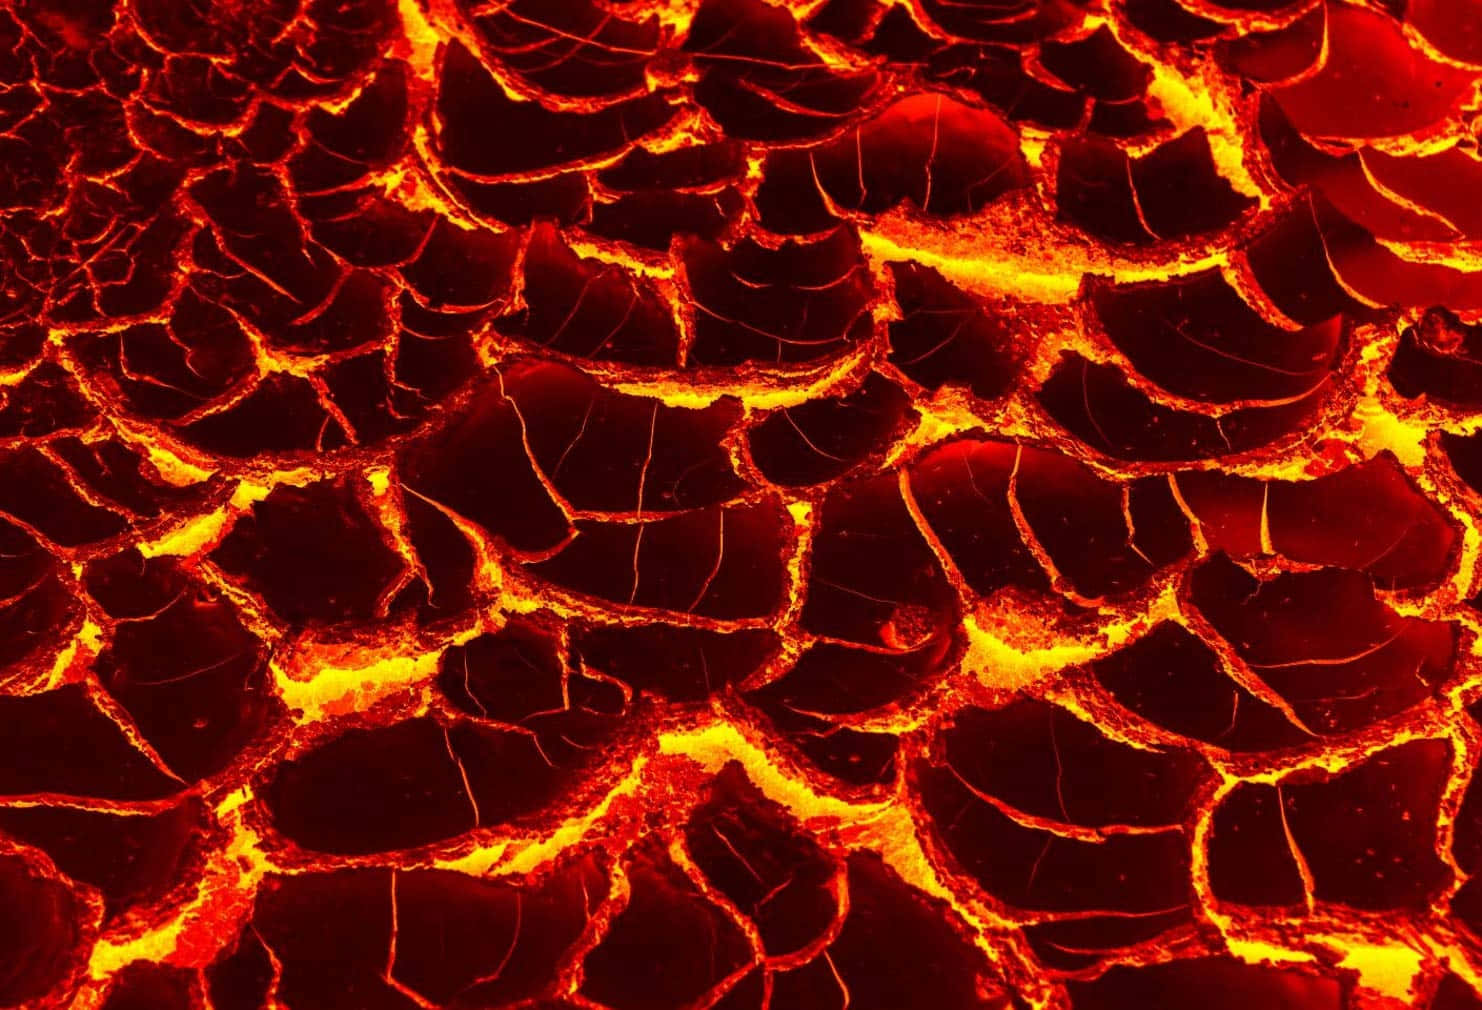 View of an intense flow of flowing hot lava